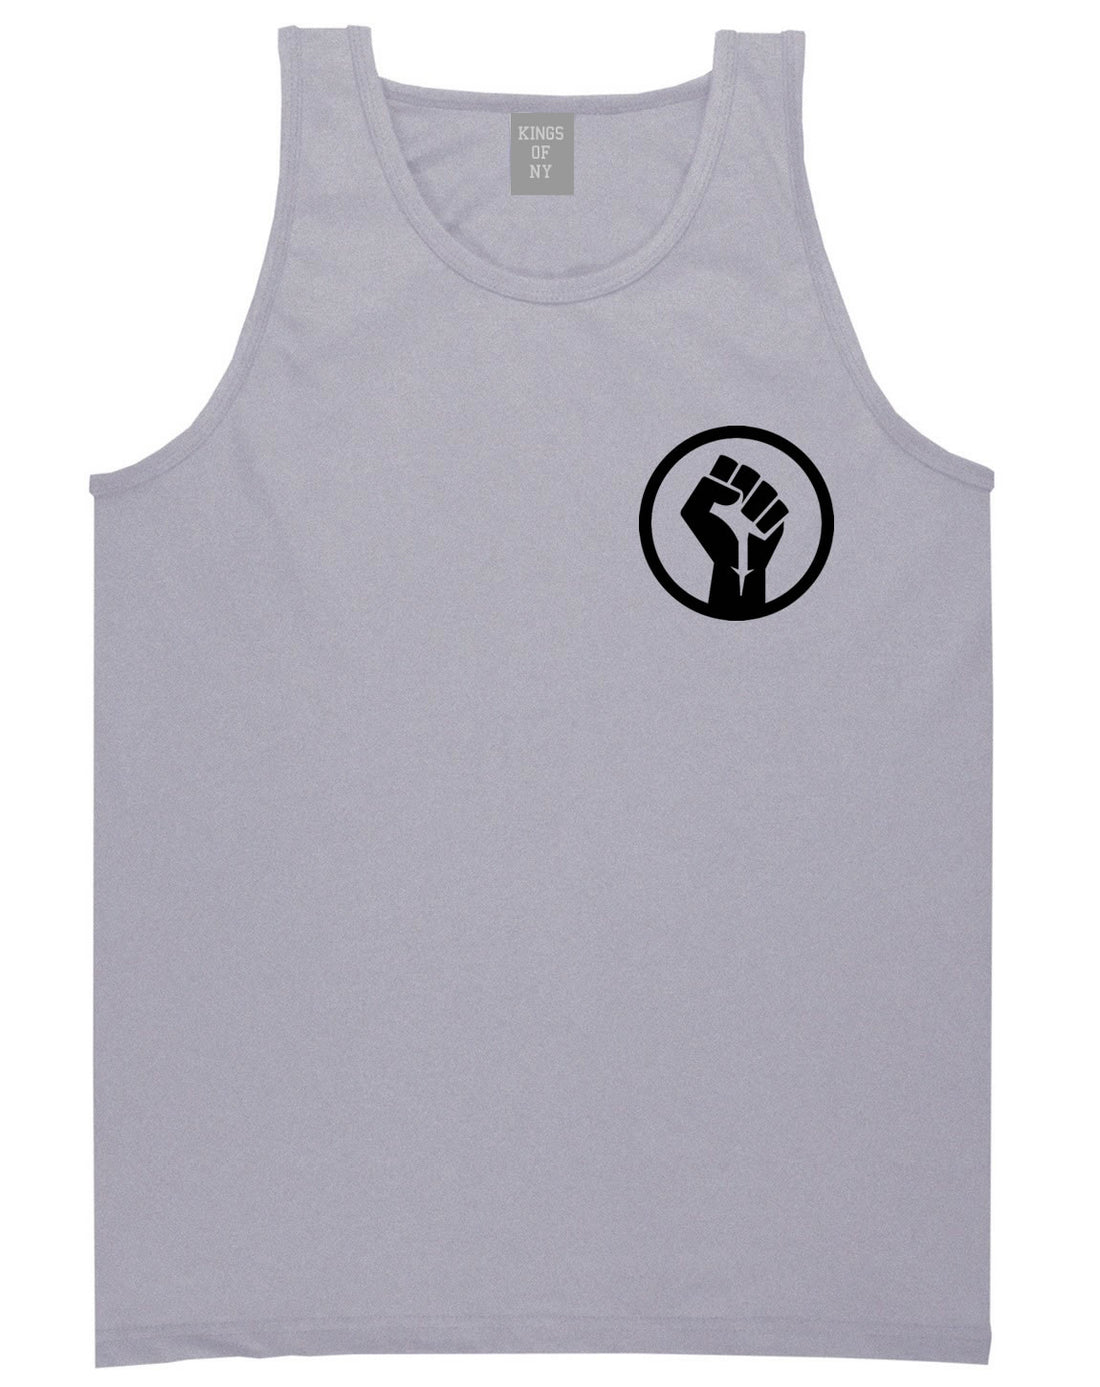 Black Power Fist Tank Top by Kings Of NY